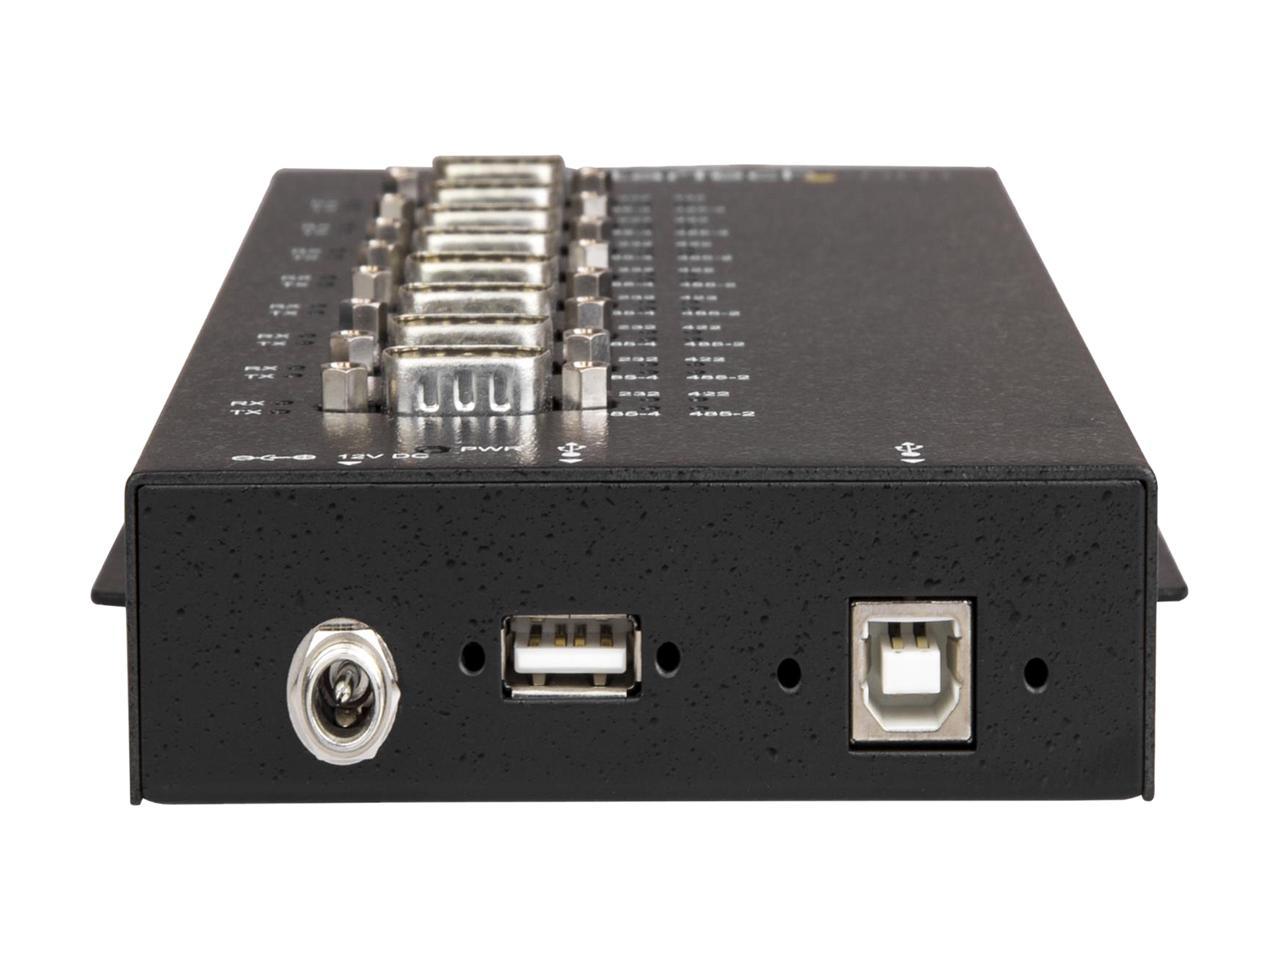 StarTech ICUSB234858I USB to RS-232/422/485 Serial Adapter - 8 Port - Industrial - 15 kV ESD Protection - USB to Serial Adapter - USB to Serial Hub - image 4 of 5